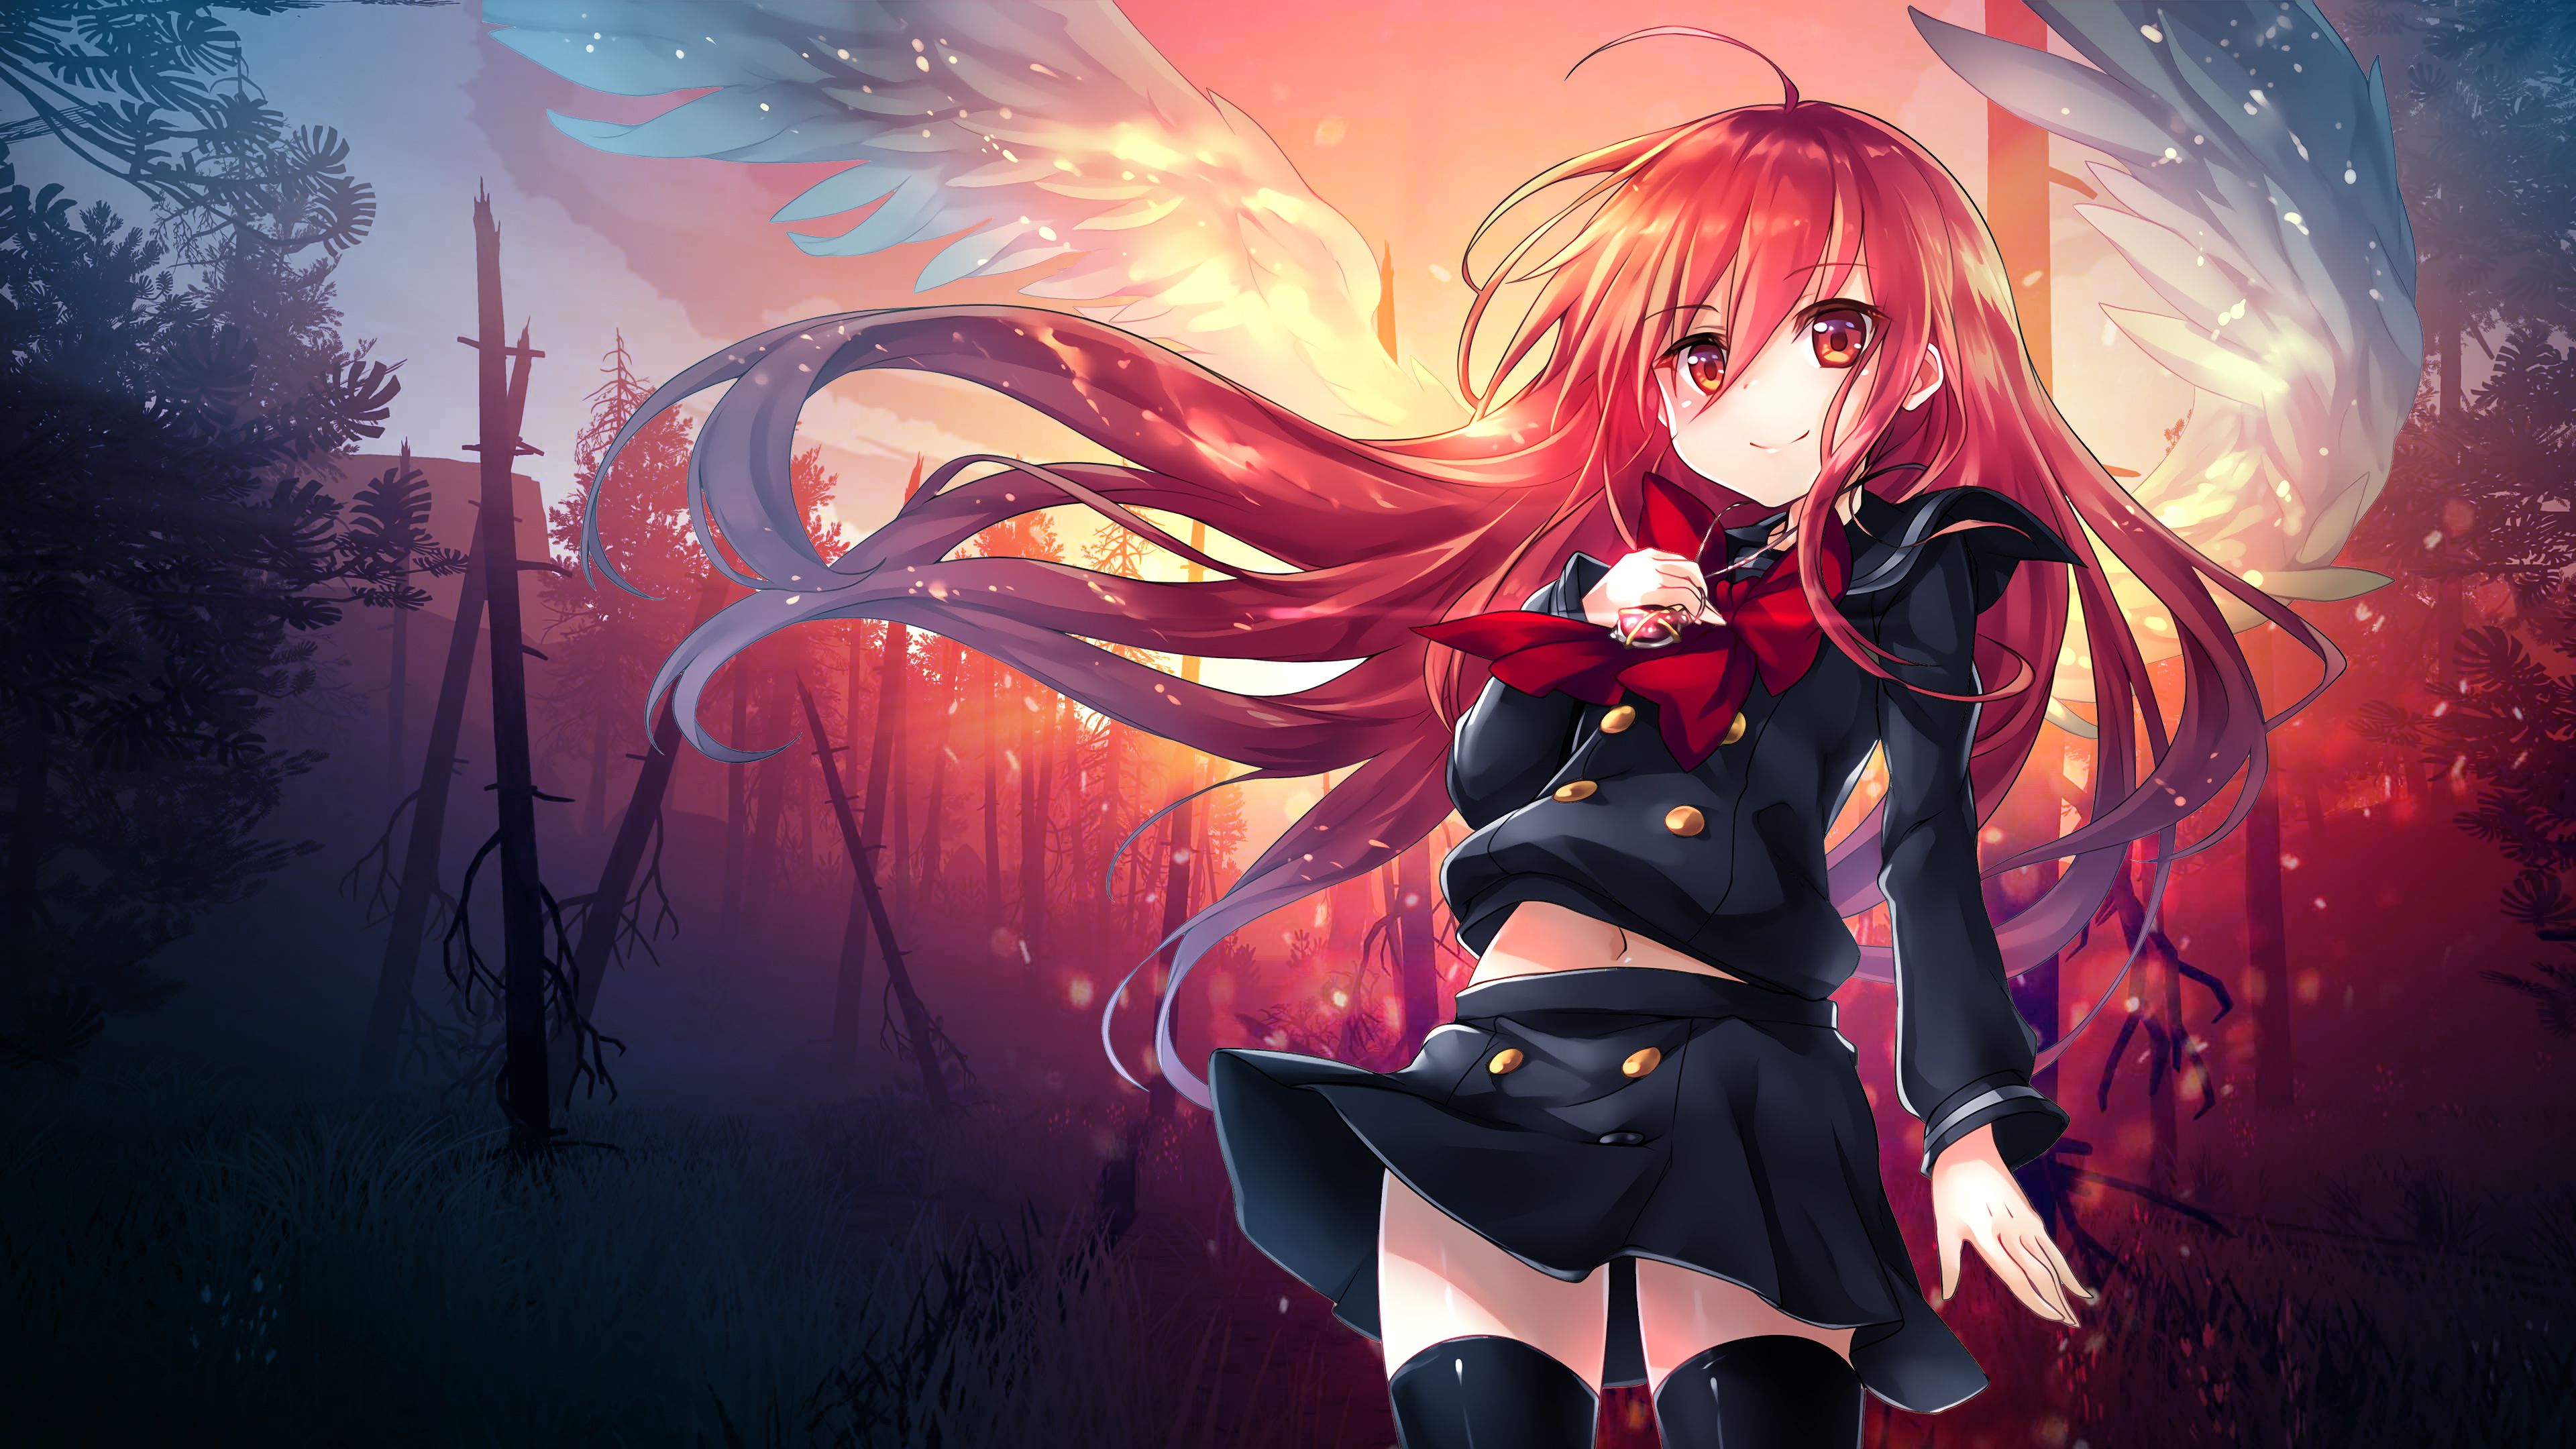 Hd anime wallpapers free download